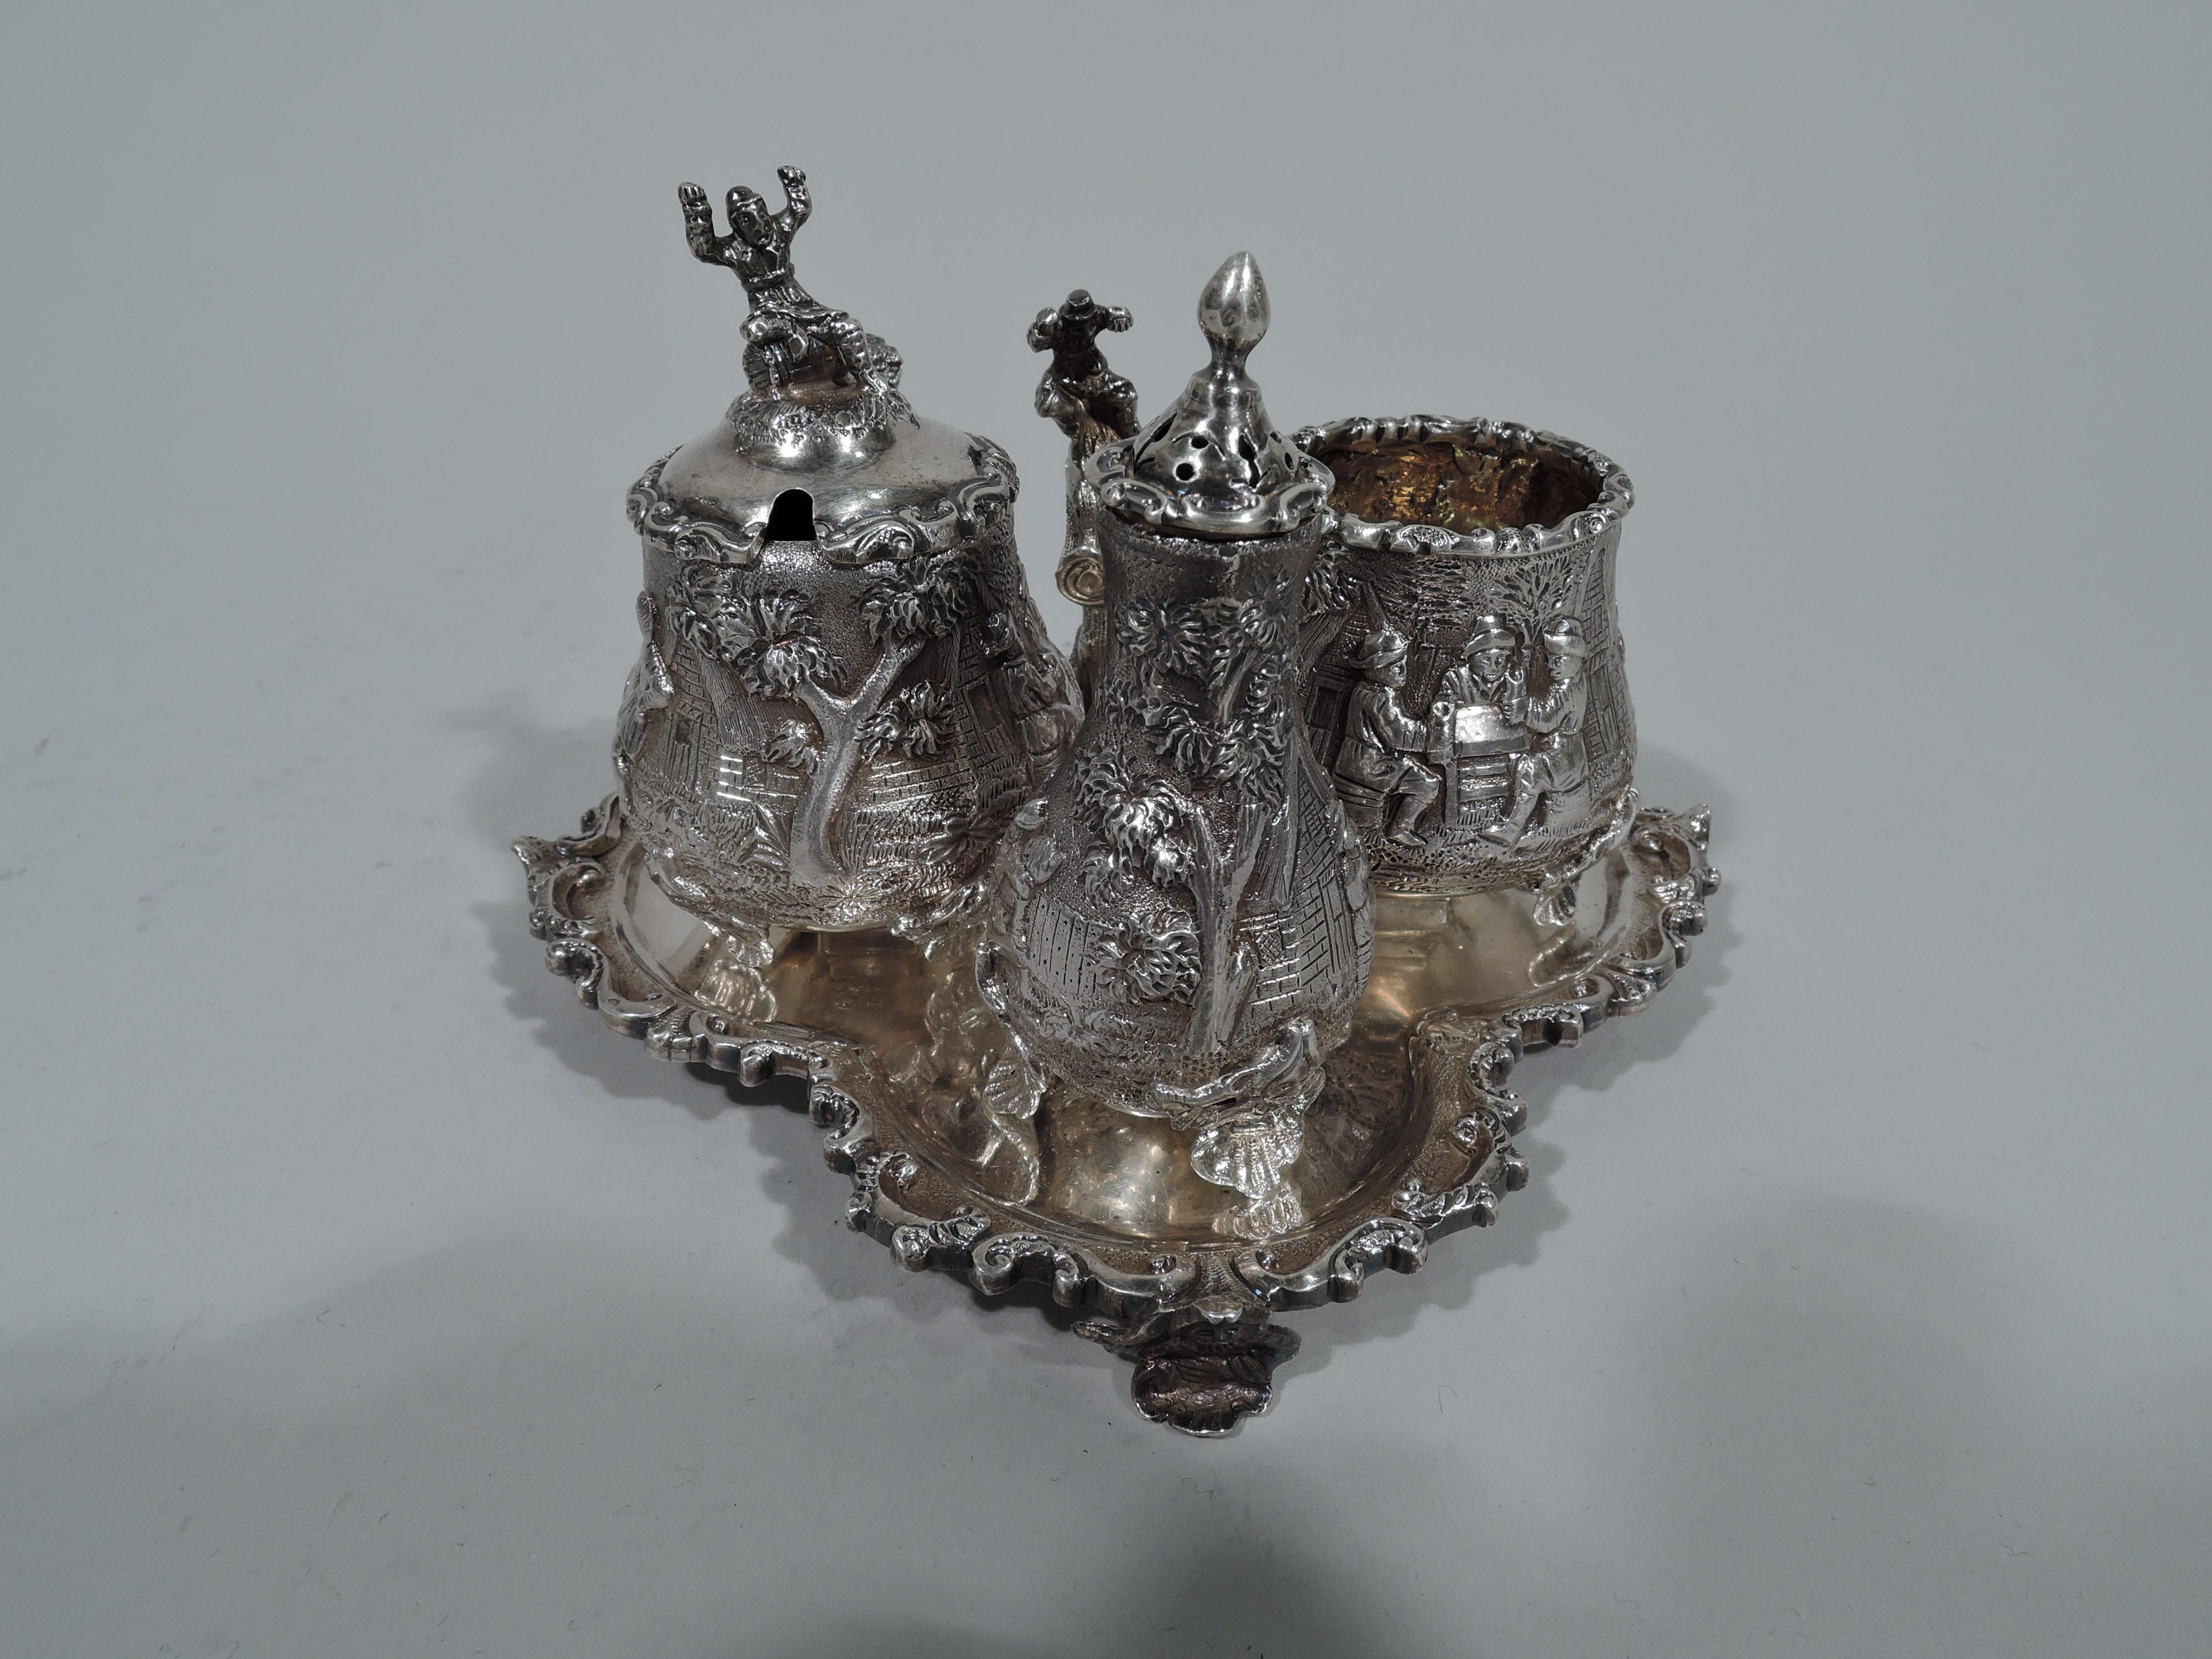 Victorian sterling silver condiment set. Made by George Fox in London in 1881. This set comprises mustard pot, open salt, and pepper shaker on stand. 

Mustard pot has hinged cover with twig scroll handle and figural finial of man seated on